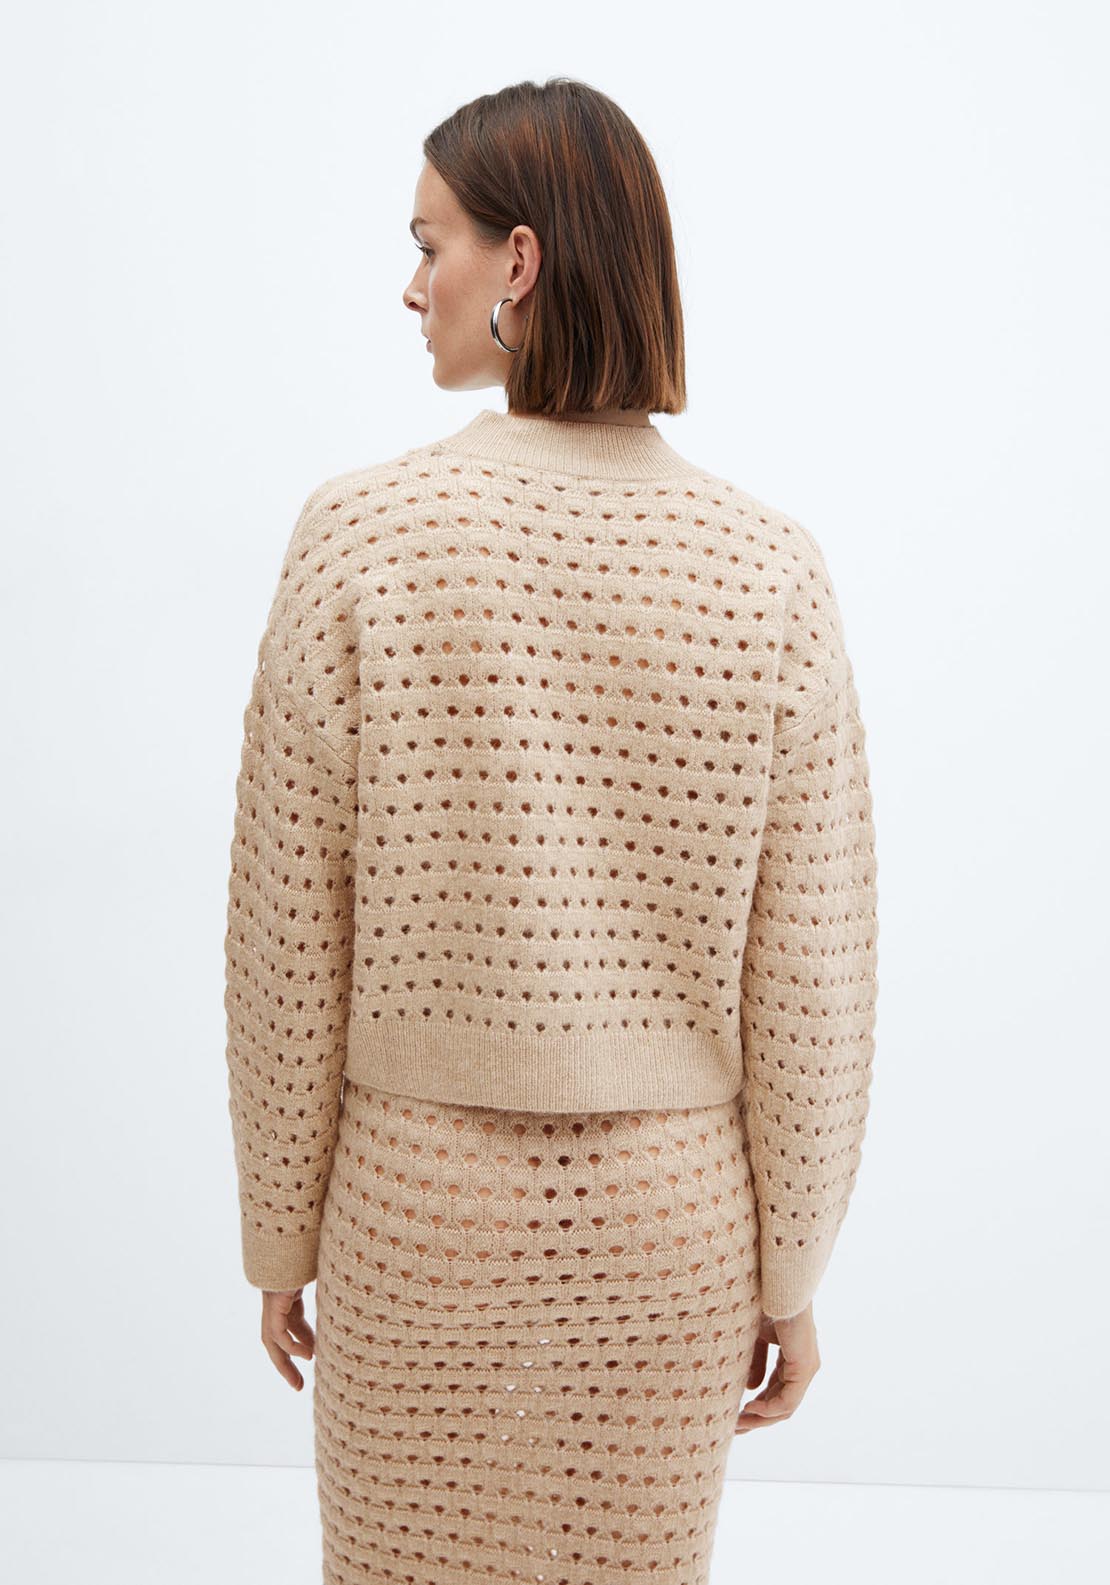 Mango Perkins neck knitted sweater 4 Shaws Department Stores